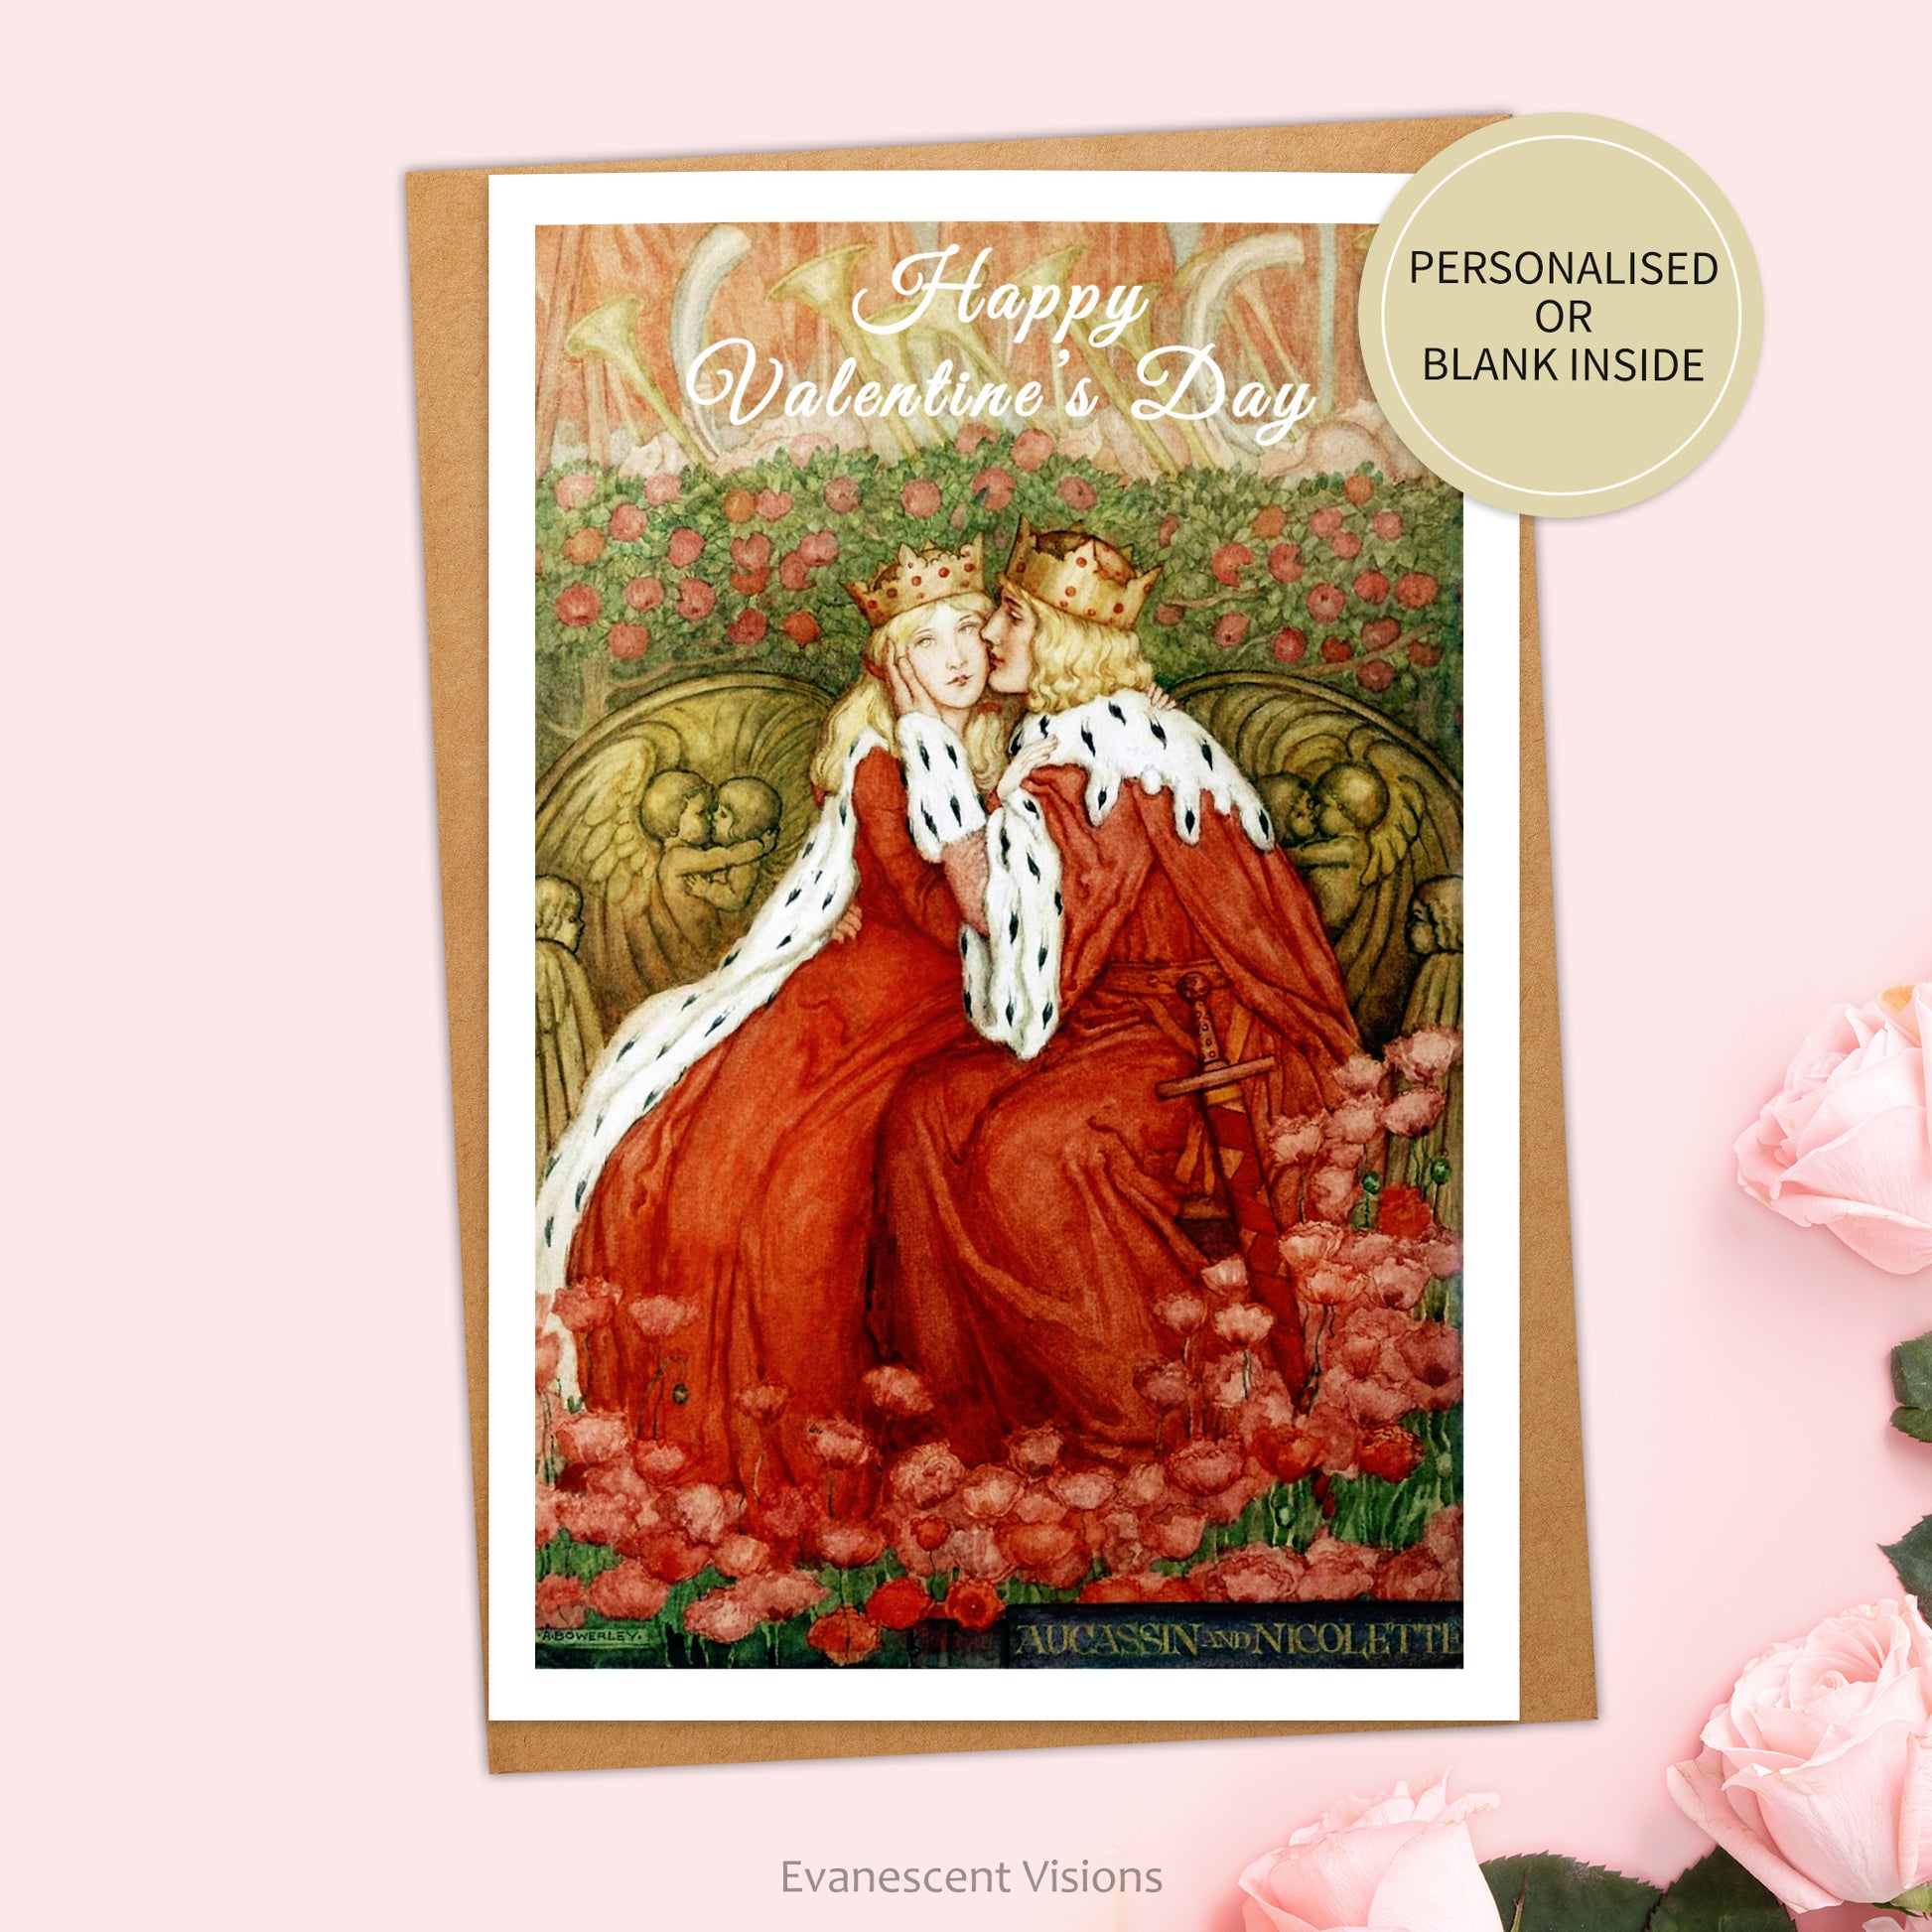 Personalised Valentine's card and envelope with the image of Aucassin and Nicolette on pink surface with roses